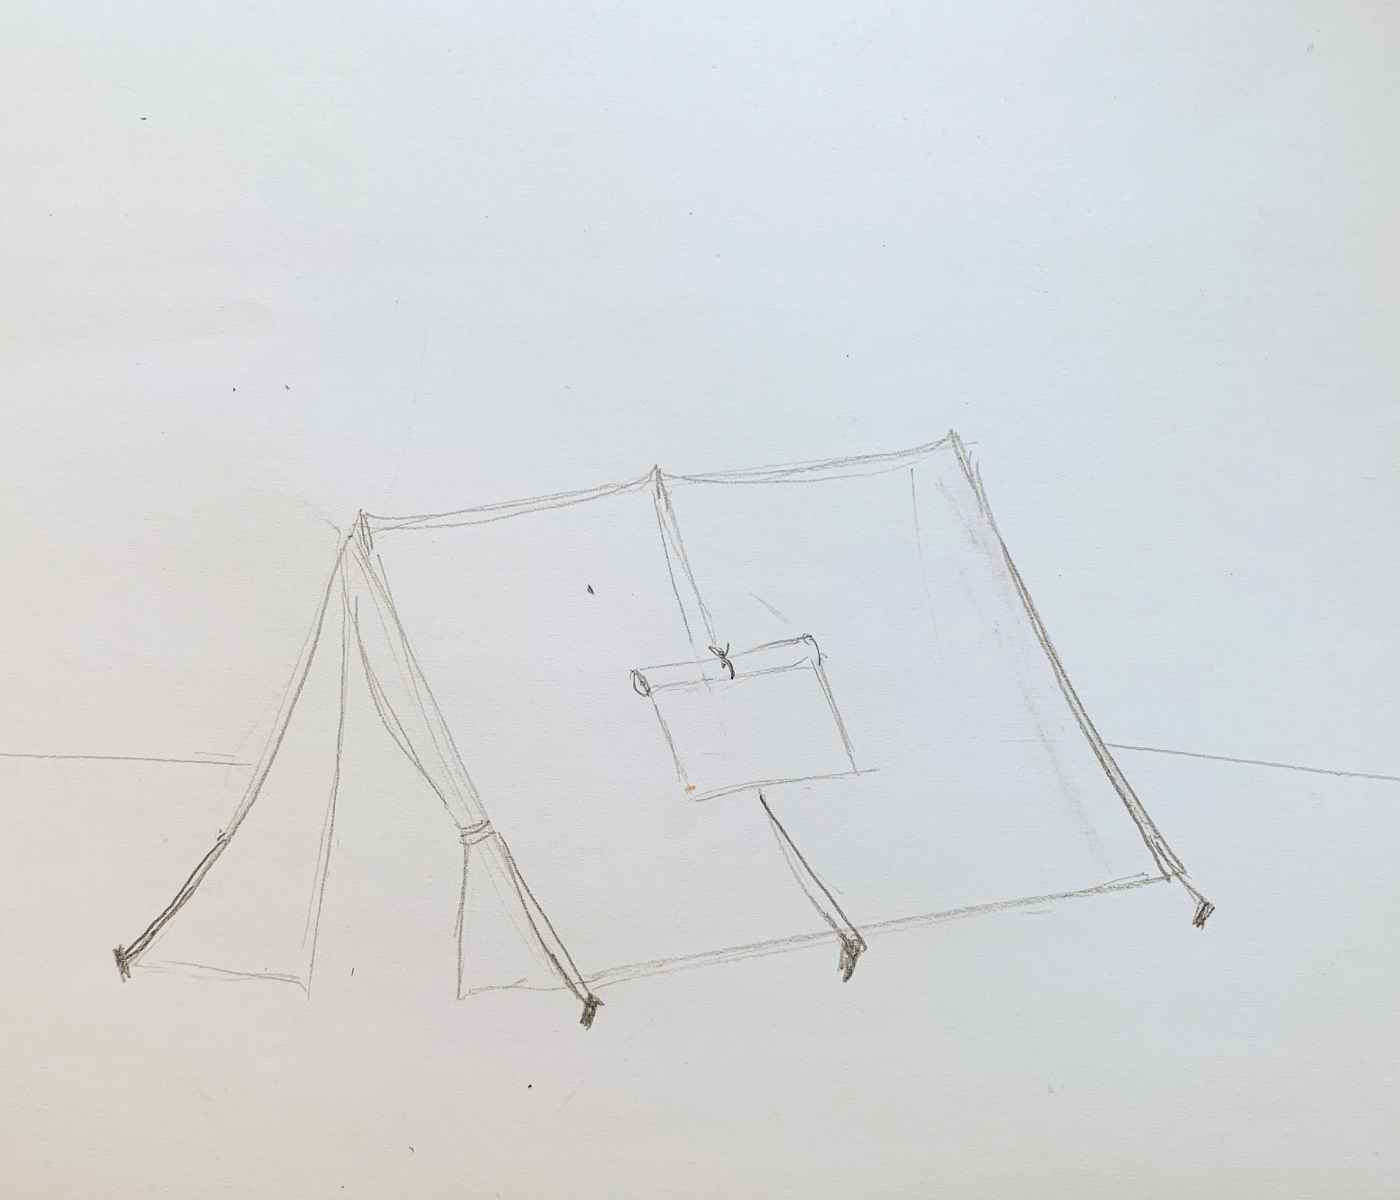 How to draw a tent